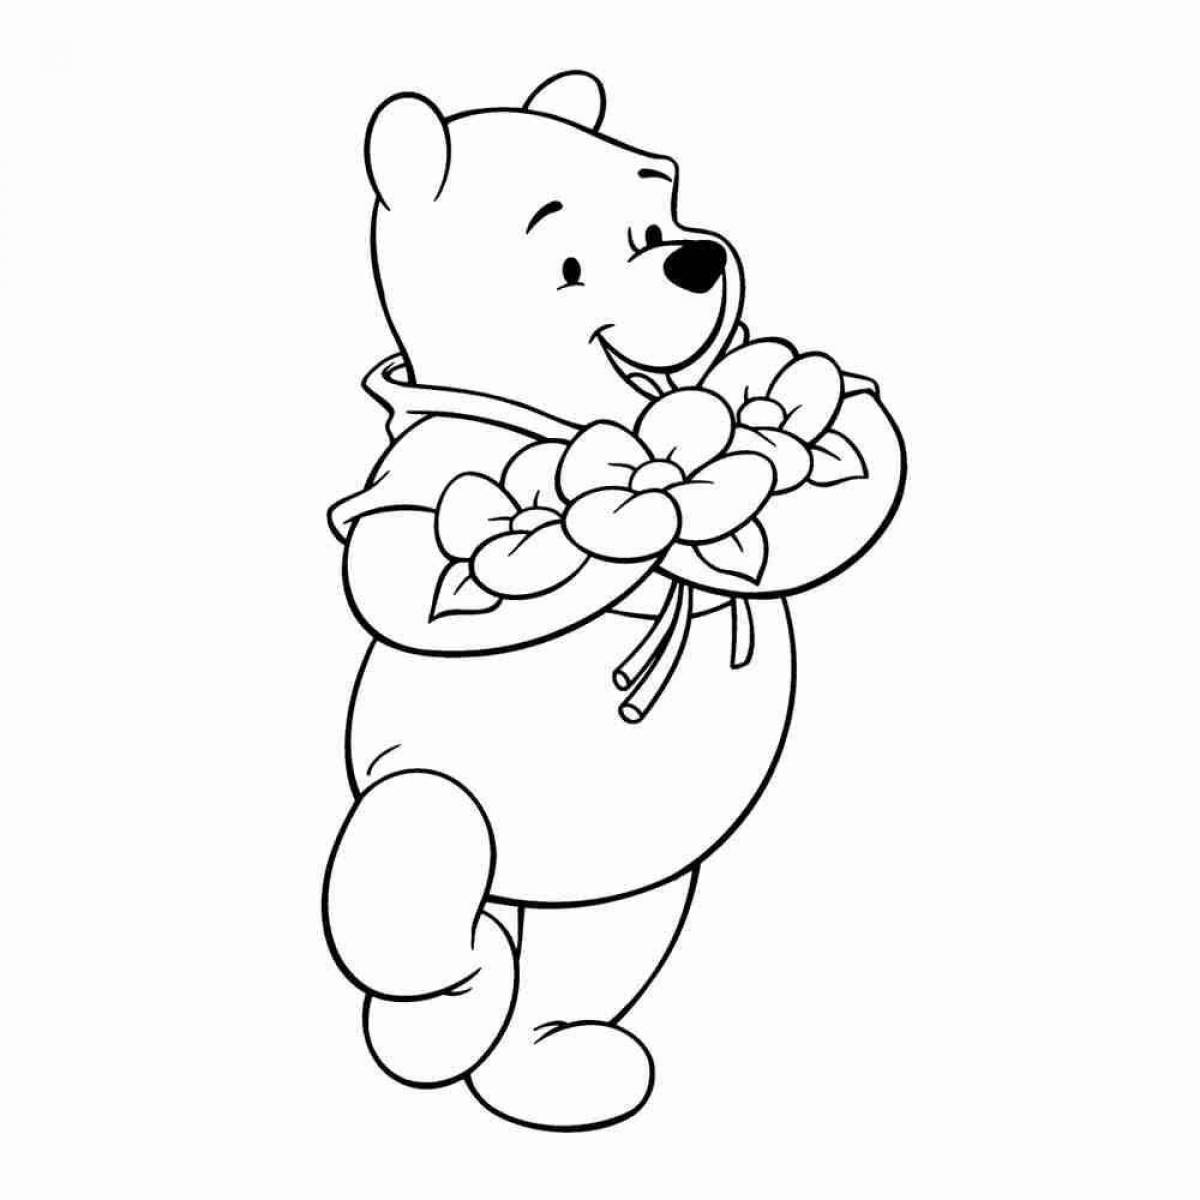 Vinnie magic coloring page